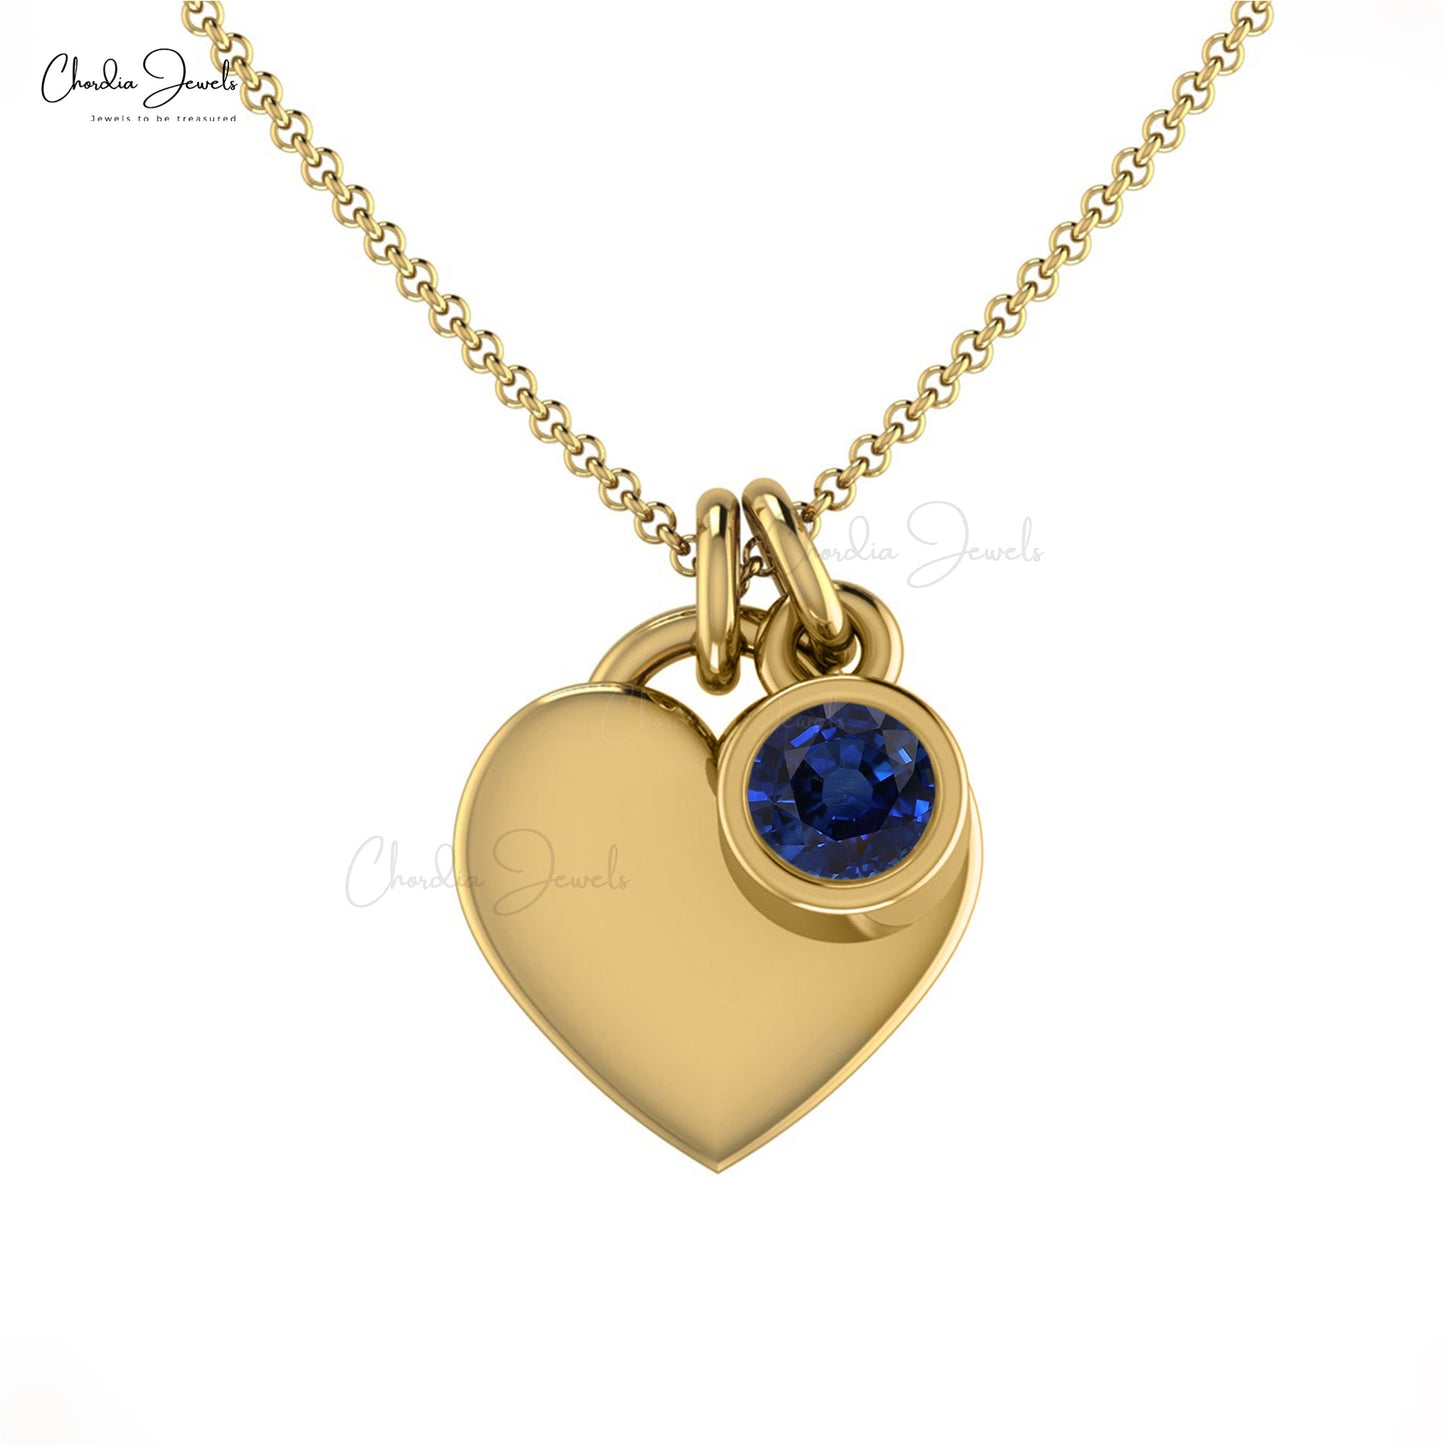 Natural Blue Sapphire Necklace, 14k Solid Gold Bezel Set Necklace, 3mm Round Cut Gemstone Necklace Gift for Her